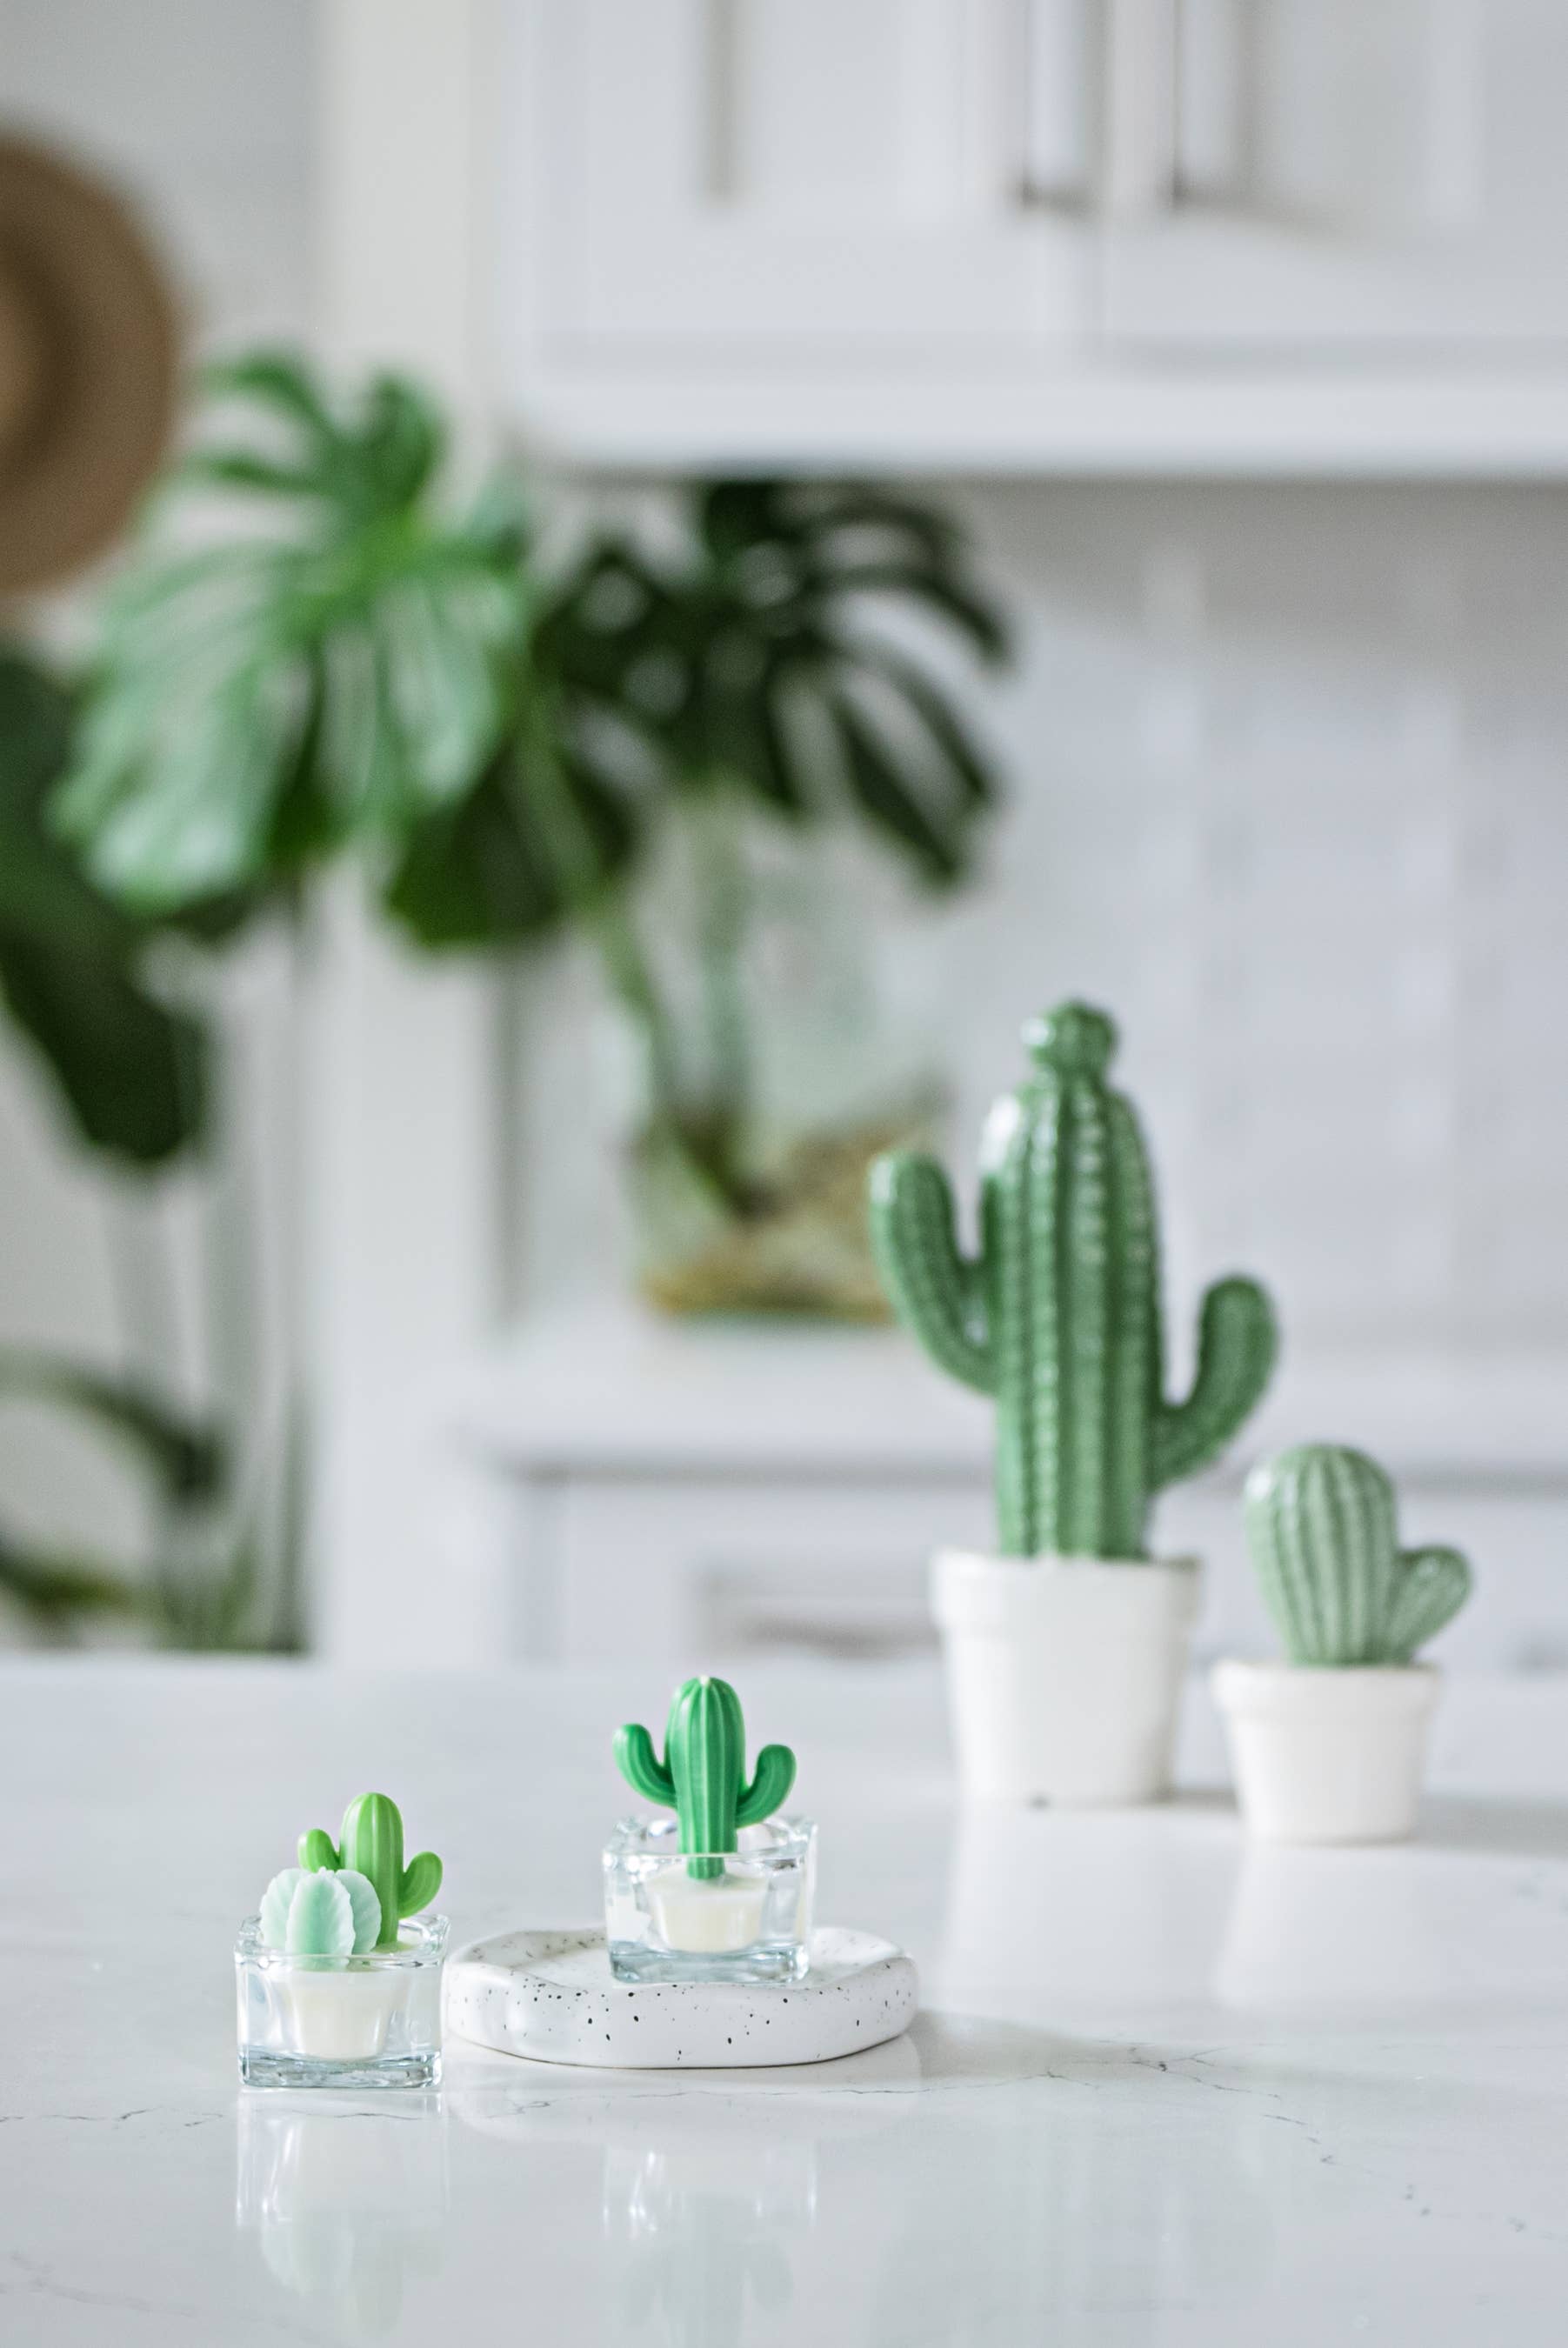 Cactus & Succulent Tealight Candles | Soy Wax Blend: Green & Green Cacti